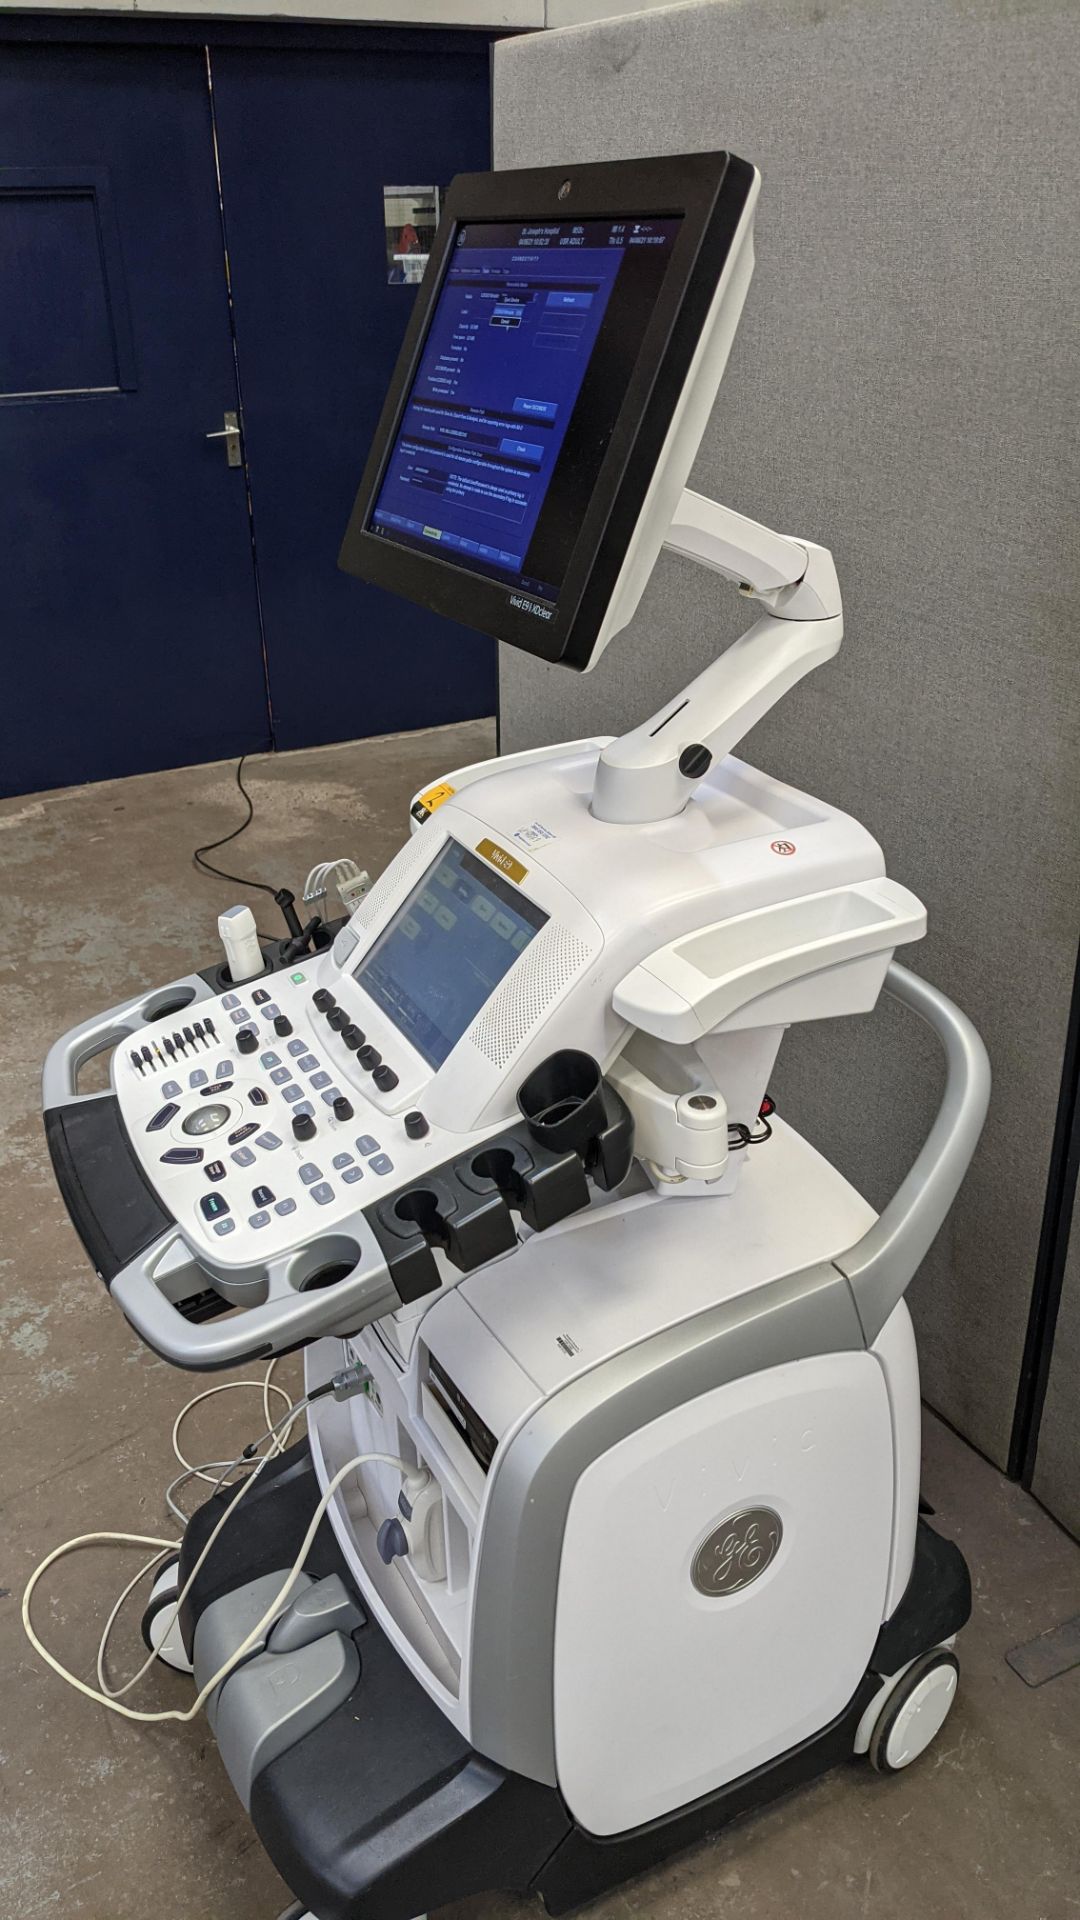 General Electric Vivid E9 cardiovascular ultrasound system. - Image 38 of 66